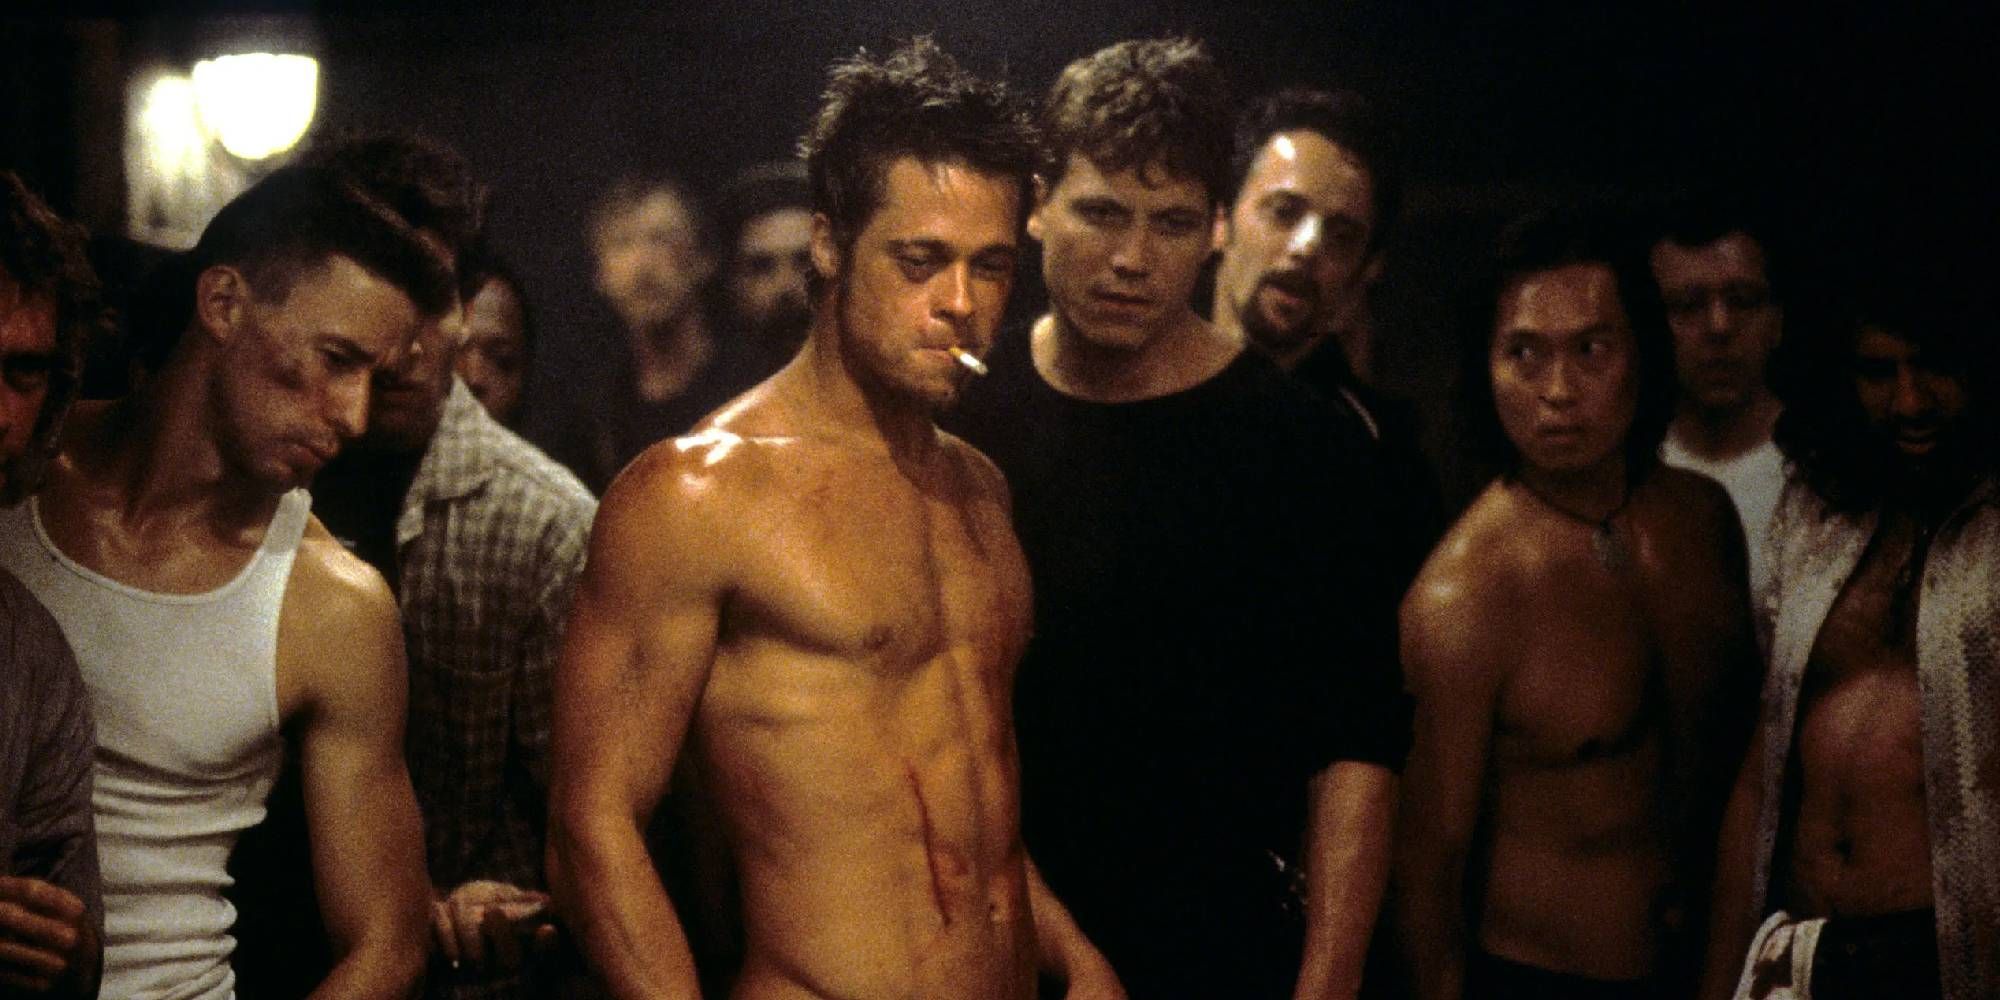 A shirtless Brad Pitt as Tyler Durden, surrounded by men in Fight Club